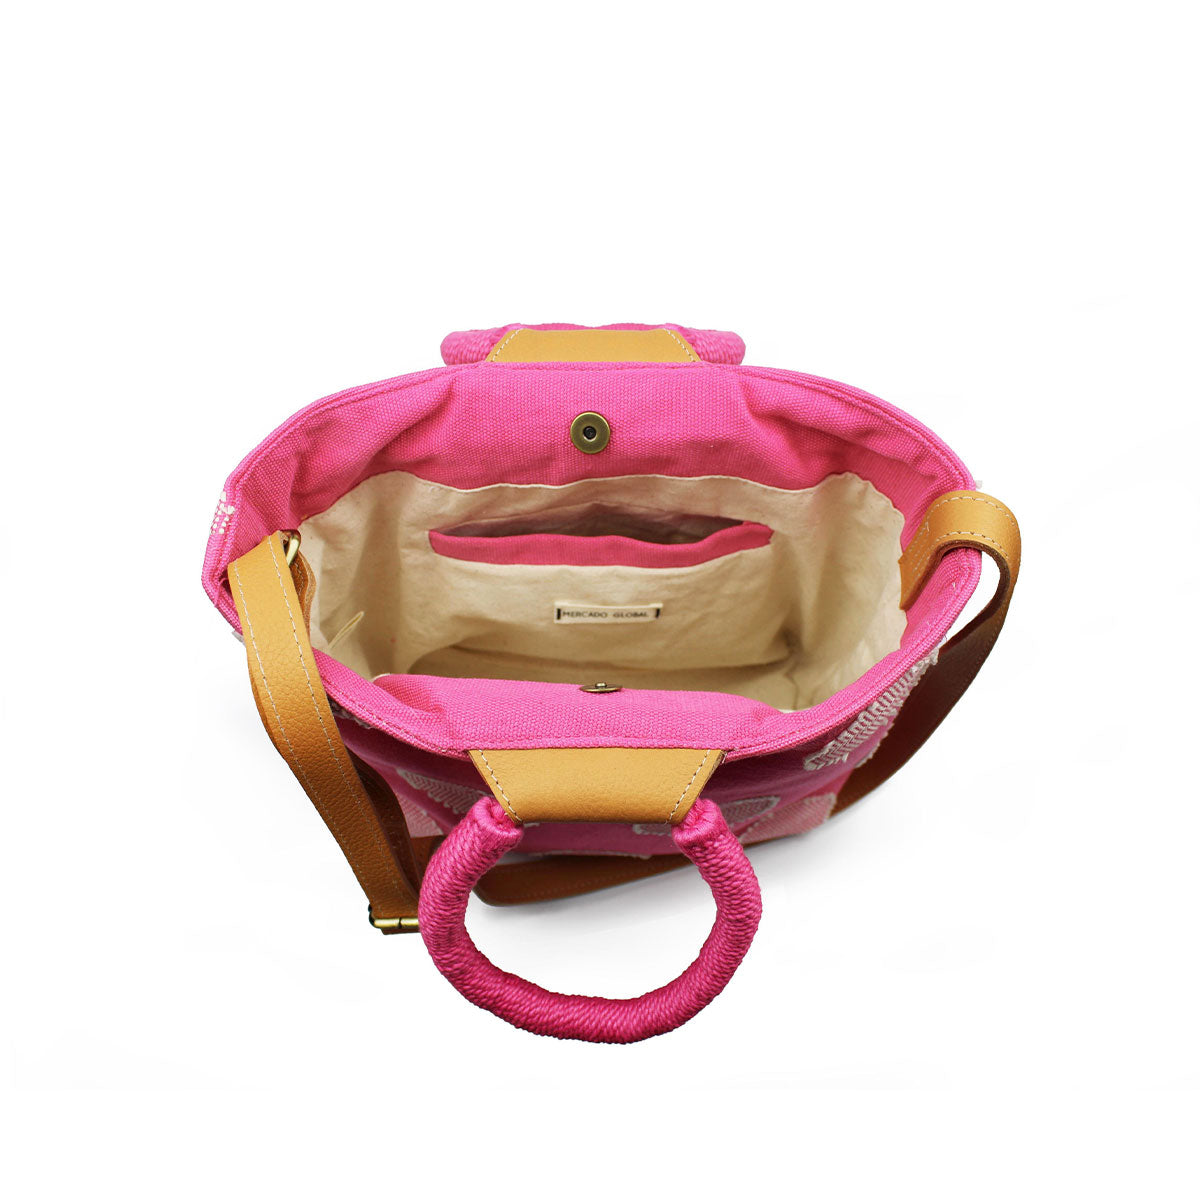 A top view of the interior of the hand woven artisan Dalila Midi Tote in Sunset Pink. It has a beige lining and an interior pocket with a pink hem. The bag closes with magnetic clasps.